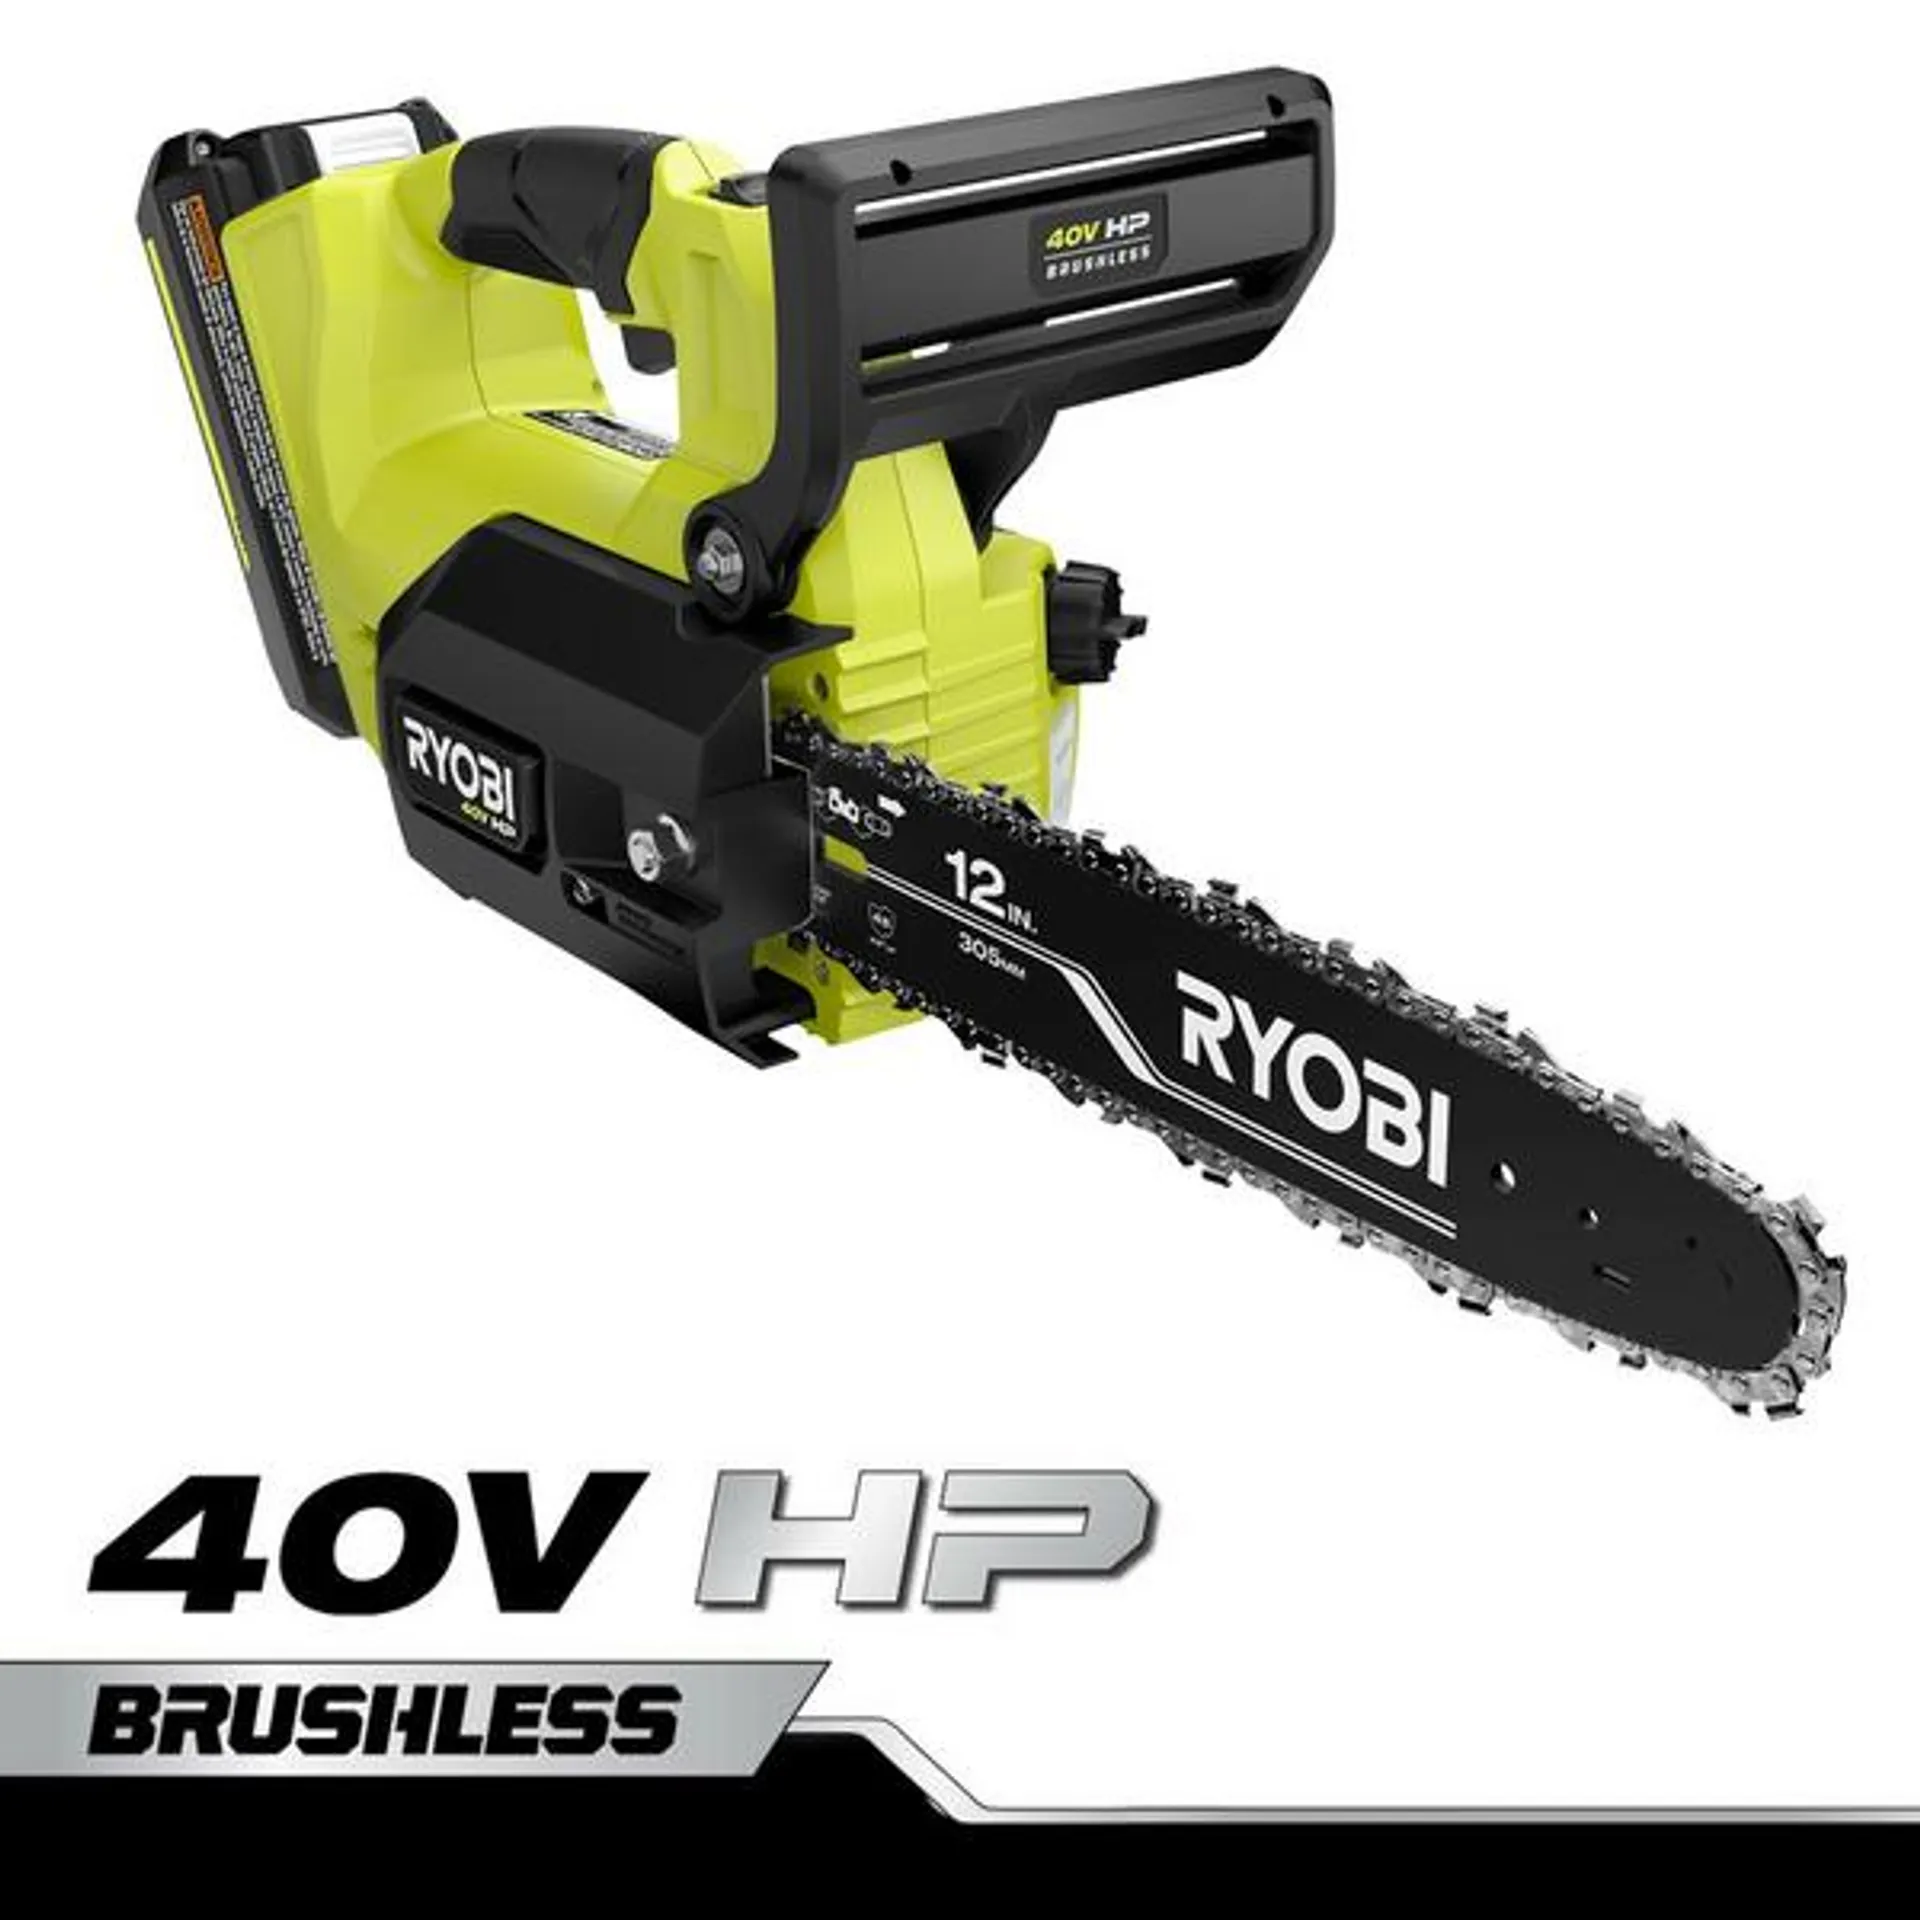 40V HP BRUSHLESS 12" TOP HANDLE CHAINSAW KIT